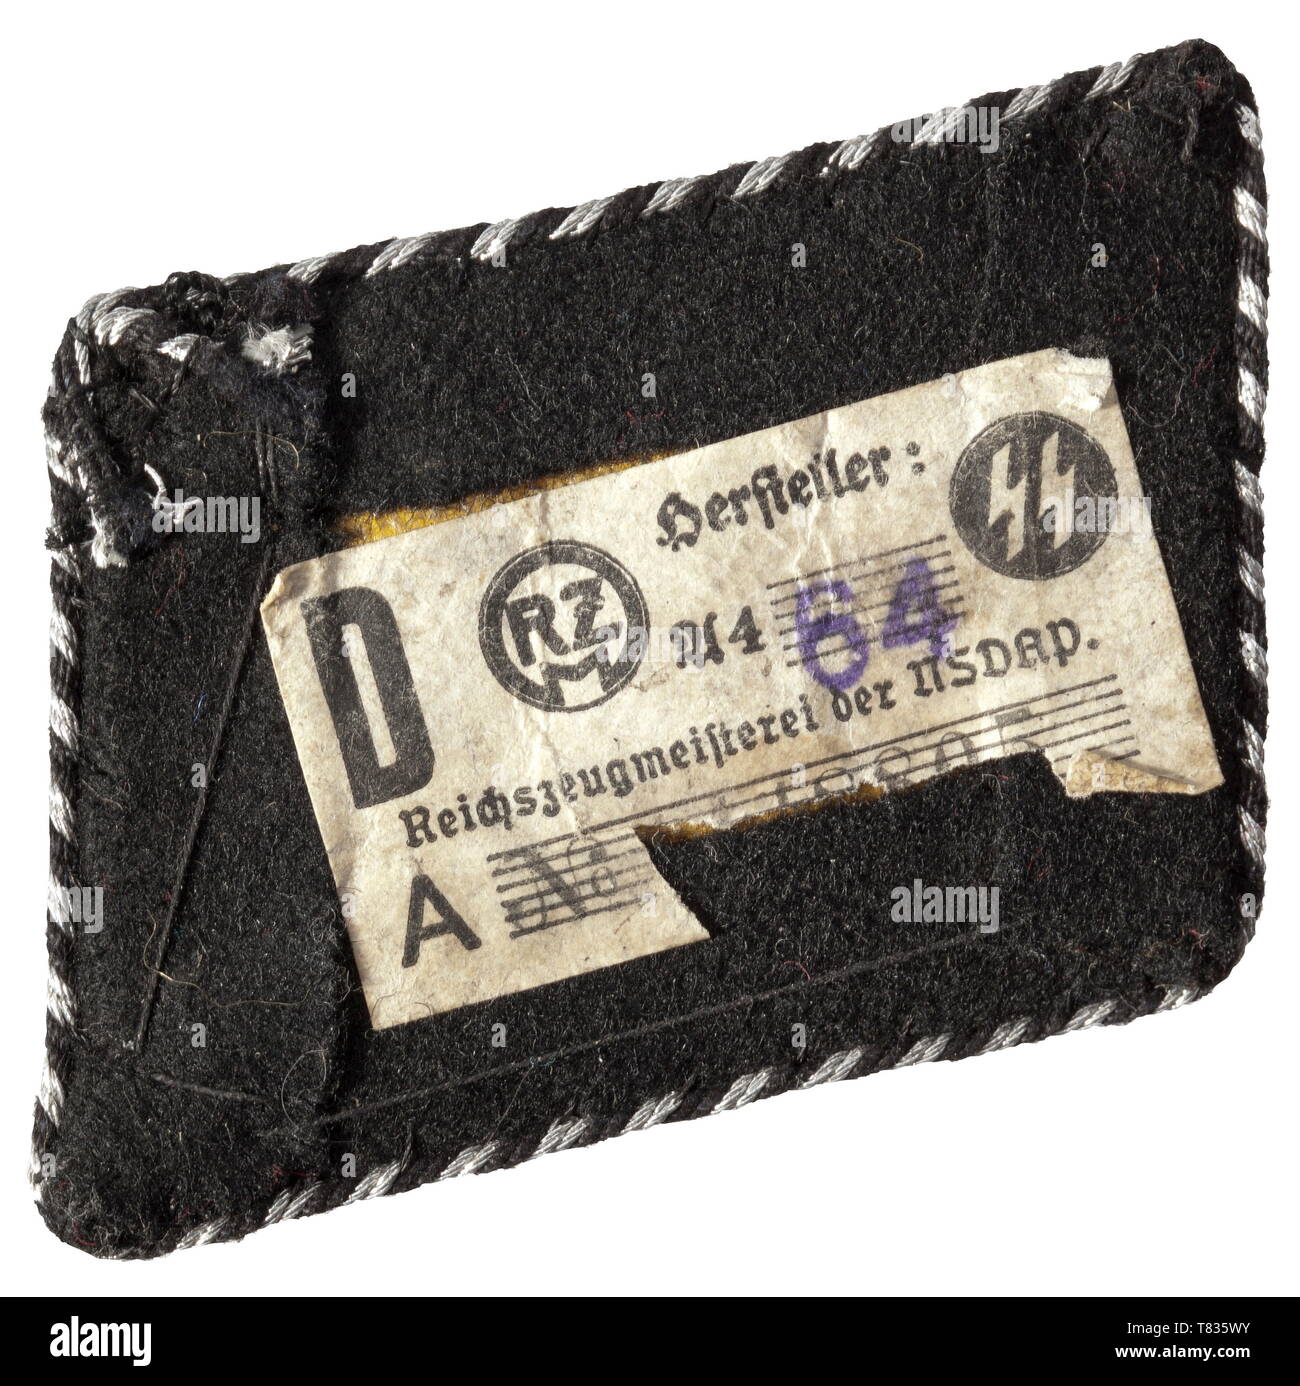 A collar patch for the SS dispositional troops for leaders of the SS school Brunswick Hand-embroidered metal thread on a black velvet backing. Continuous black-silver piping. Slightly damaged RZM paper tag on the reverse. historic, historical, 20th century, 1930s, 1940s, Waffen-SS, armed division of the SS, armed service, armed services, NS, National Socialism, Nazism, Third Reich, German Reich, Germany, military, militaria, utensil, piece of equipment, utensils, object, objects, stills, clipping, clippings, cut out, cut-out, cut-outs, fascism, fascistic, National Socialist, Editorial-Use-Only Stock Photo